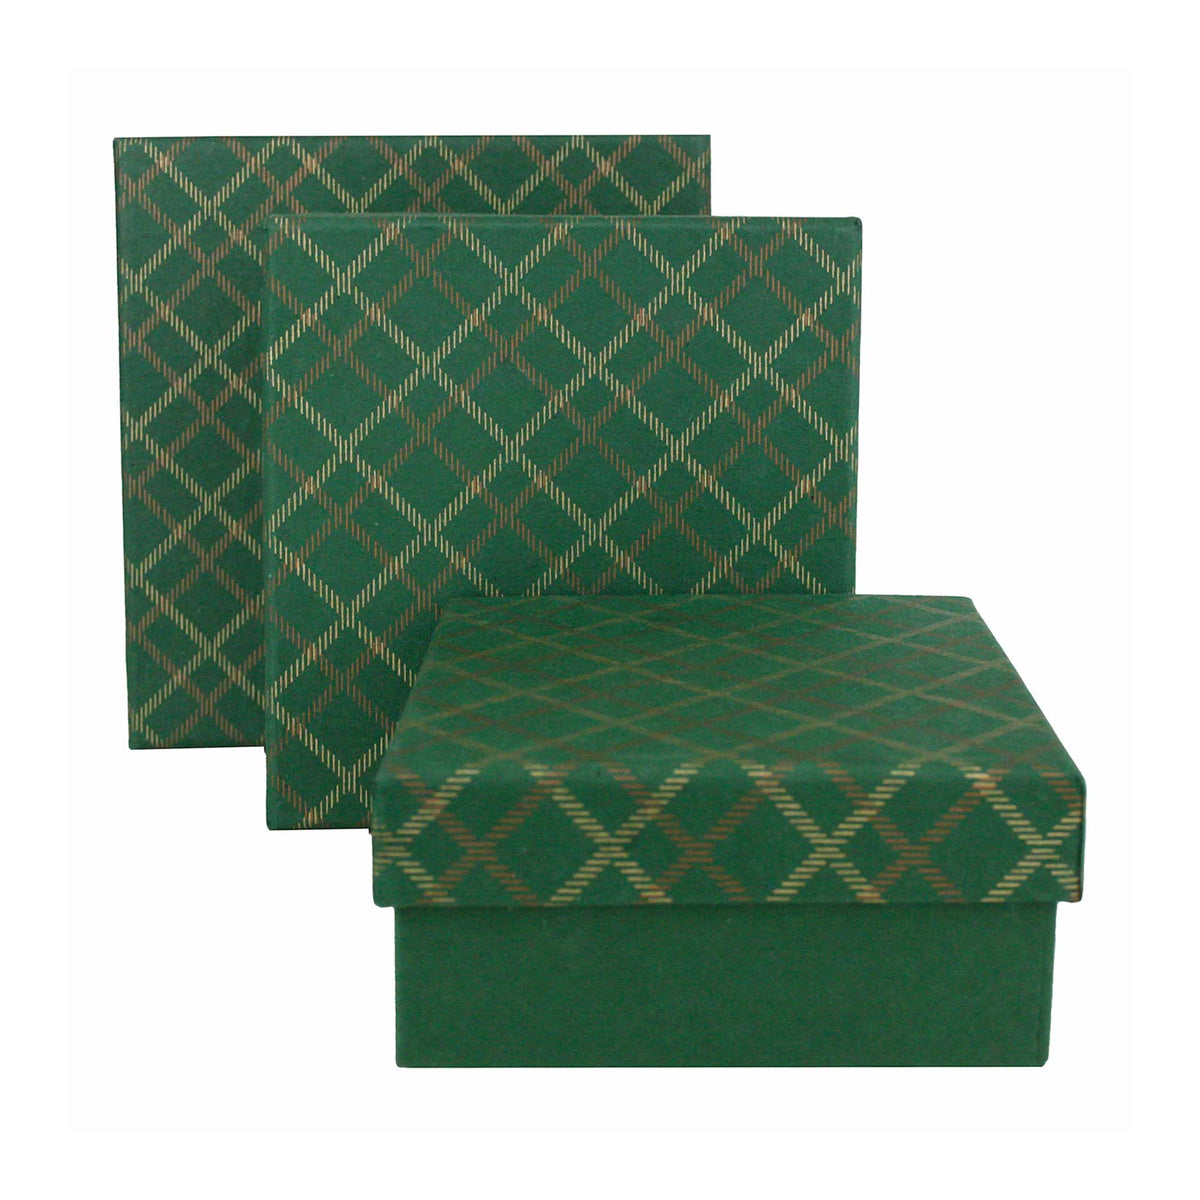 Set of 3 Handmade Green Chequered Gift Boxes